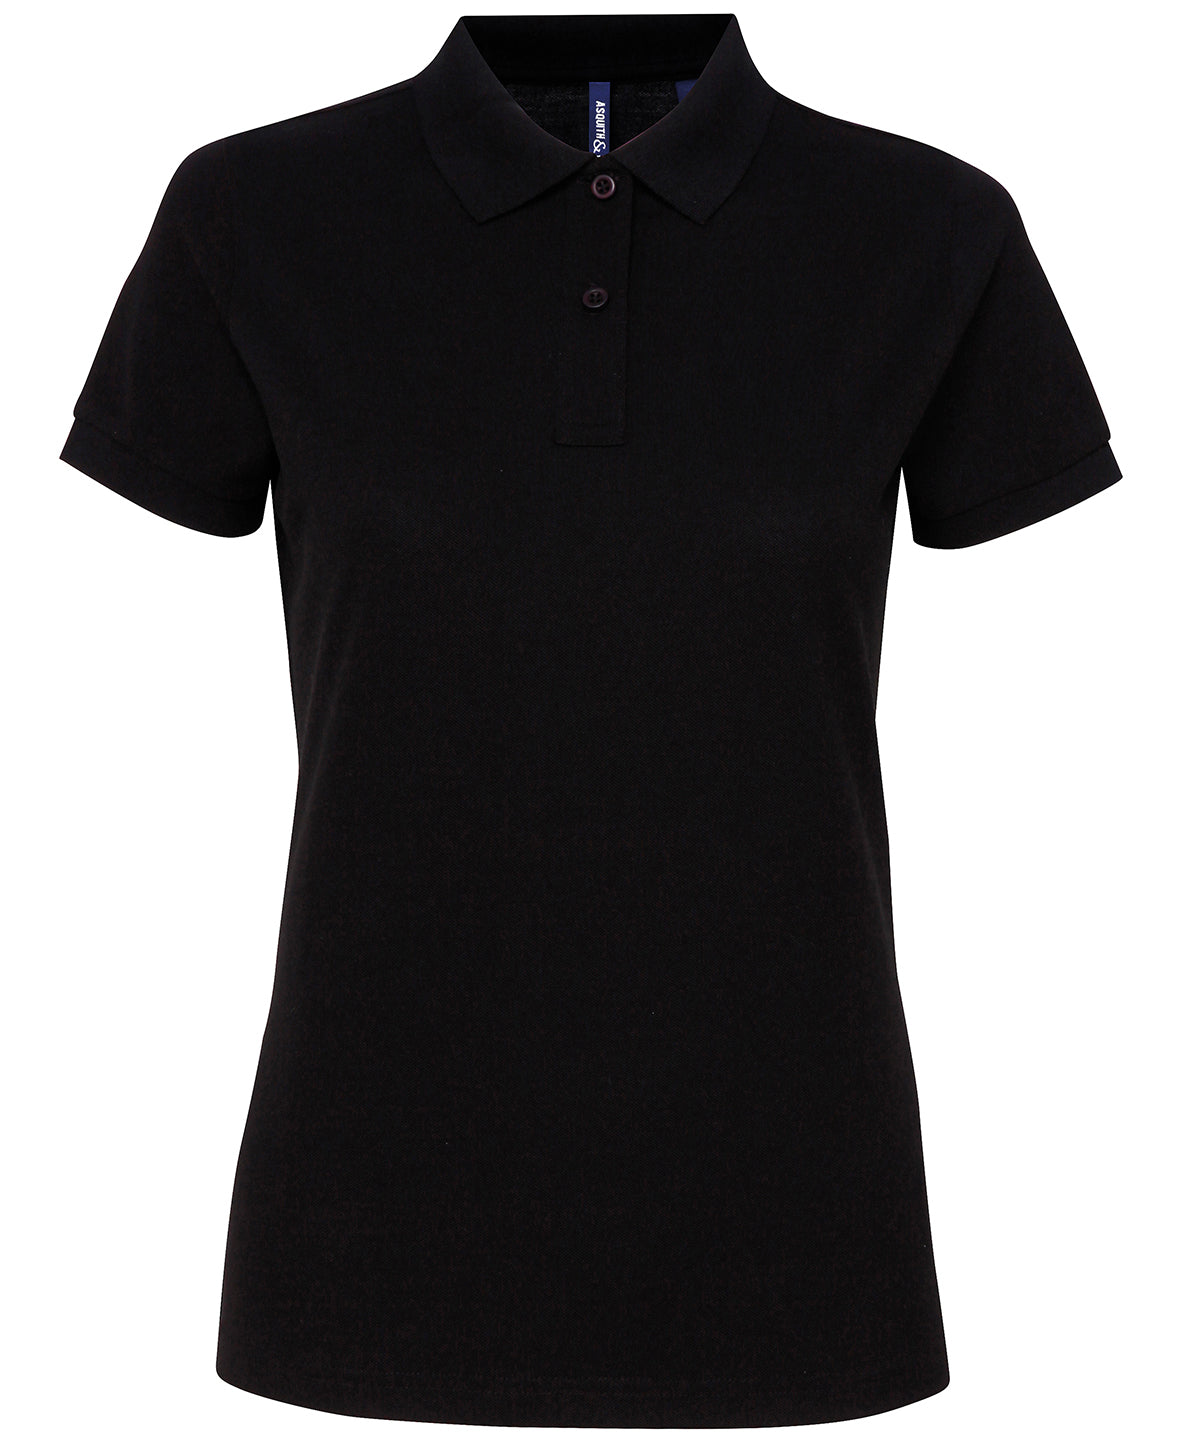 Personalised Polo Shirts - Dark Purple Asquith & Fox Women’s polycotton blend polo